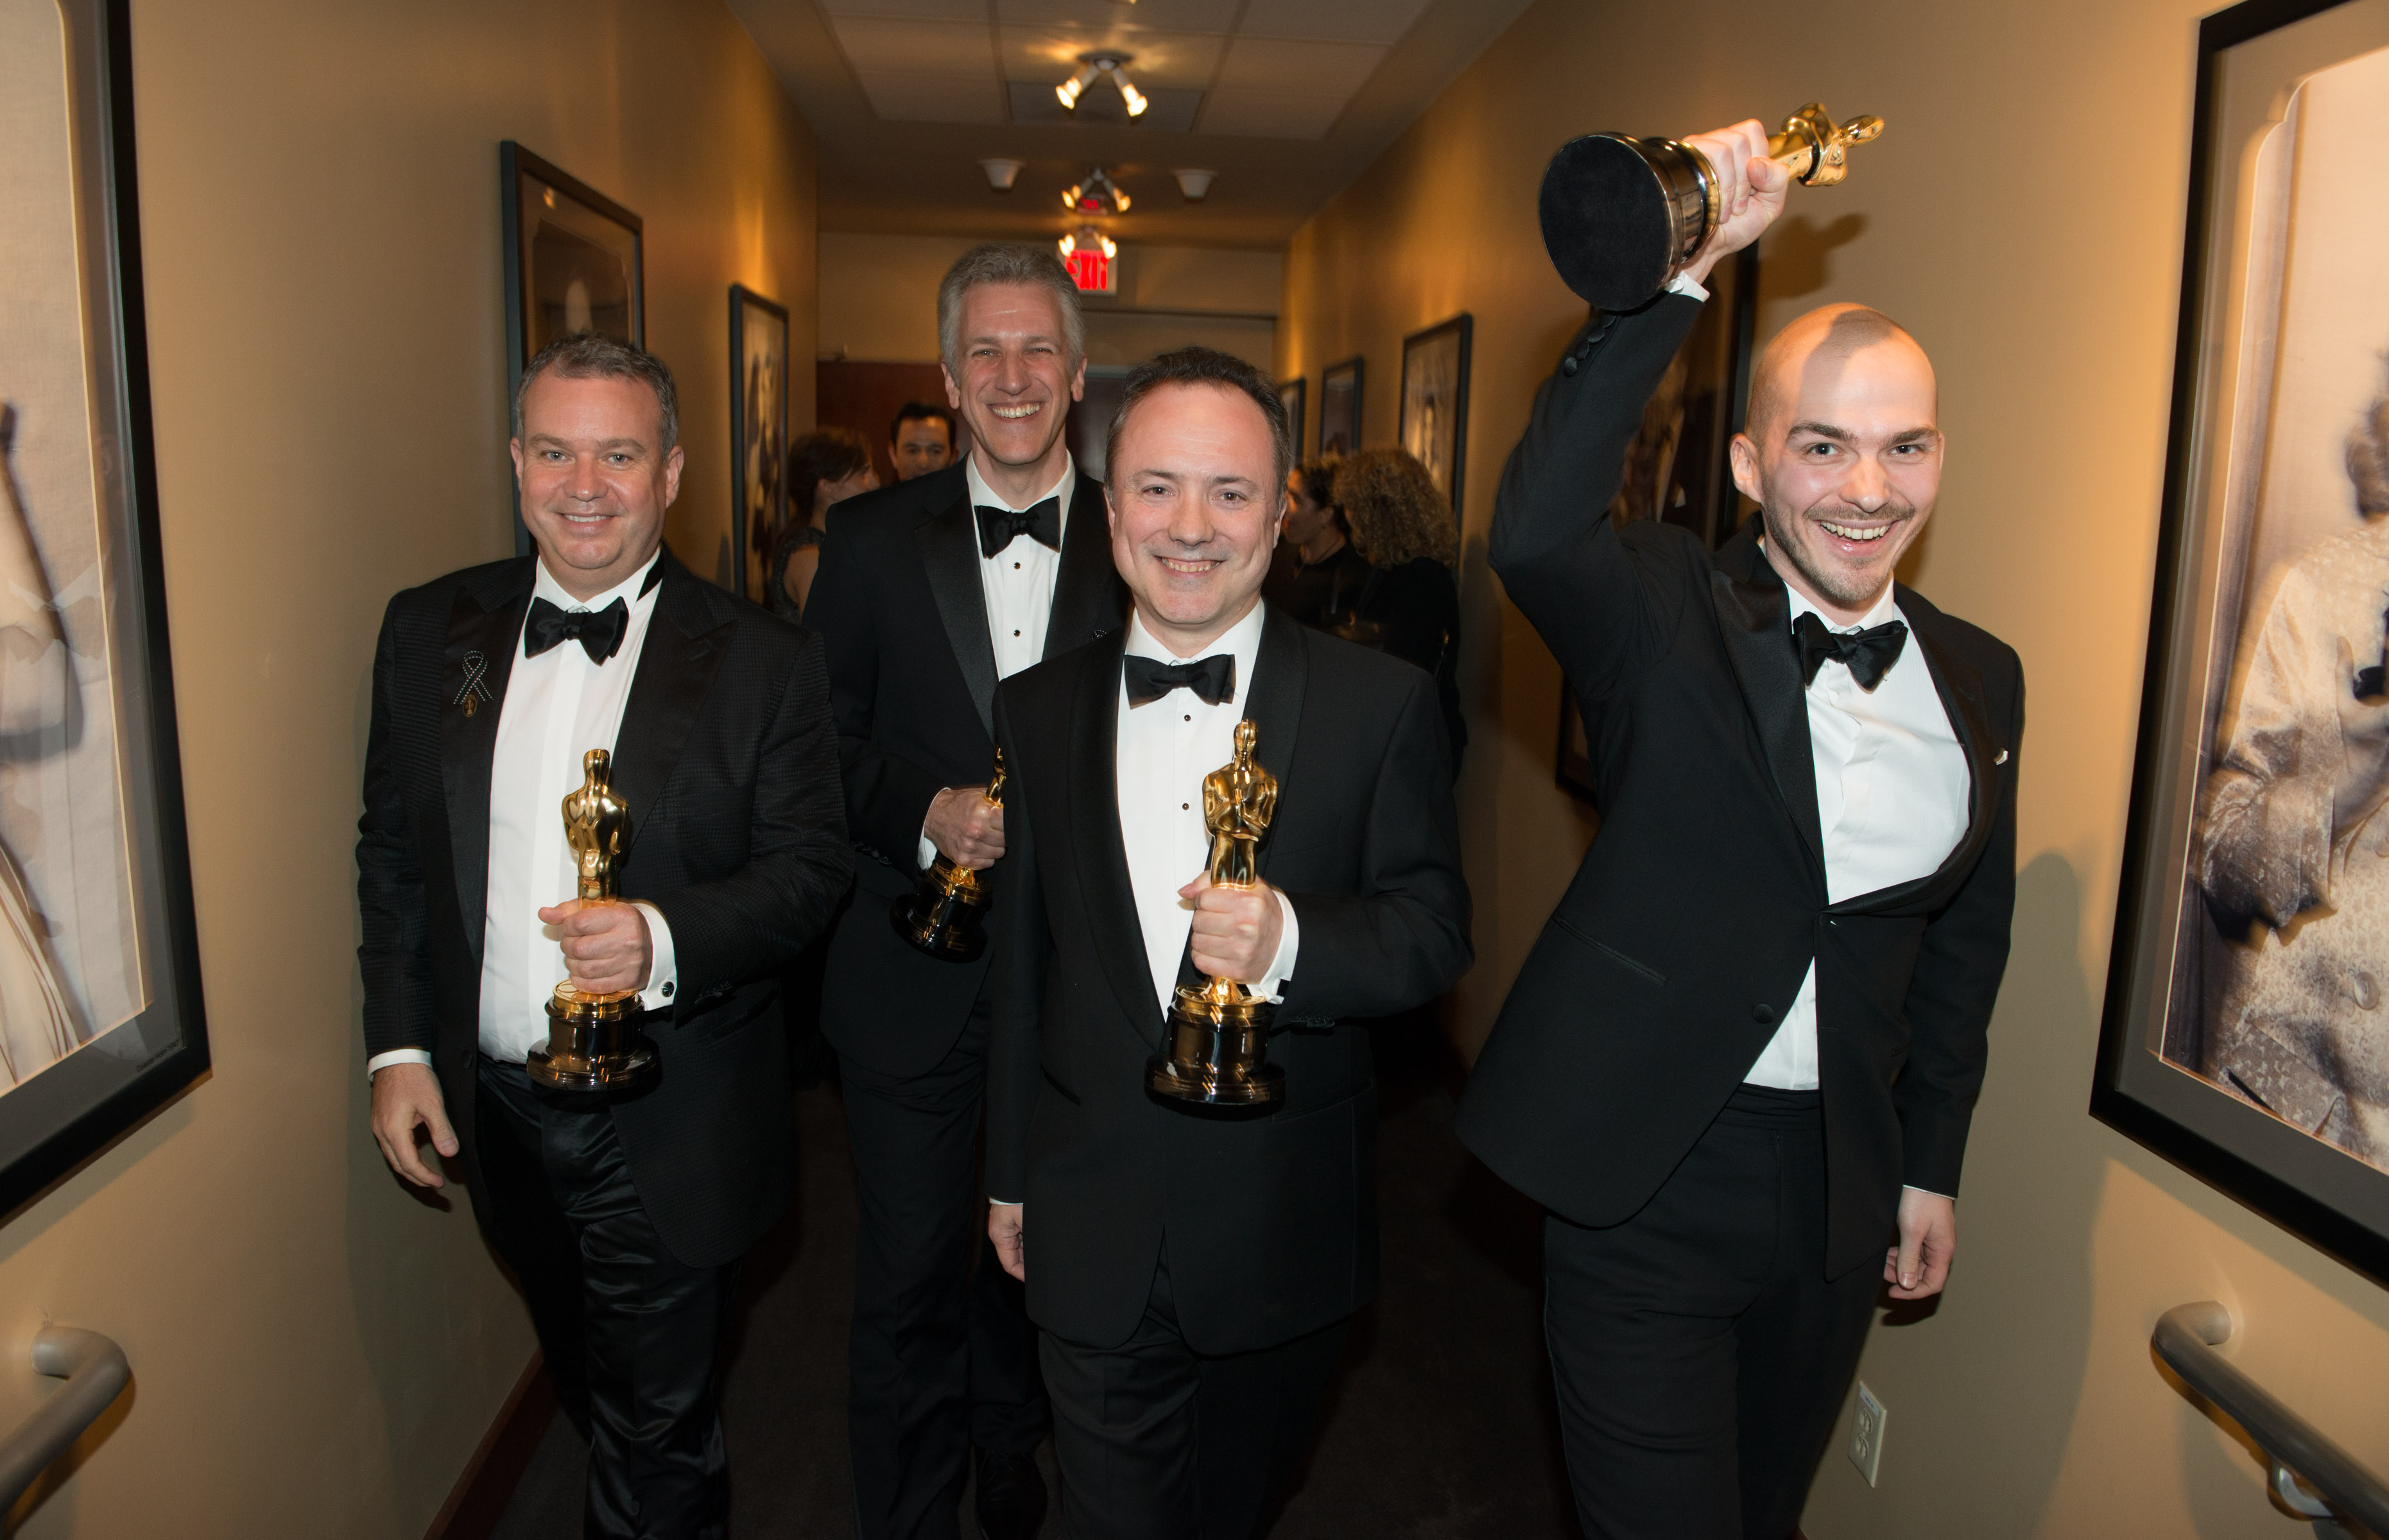 Neil Corbould, David Shirk, Tim Webber and Chris Lawrence win Academy Award for GRAVITY